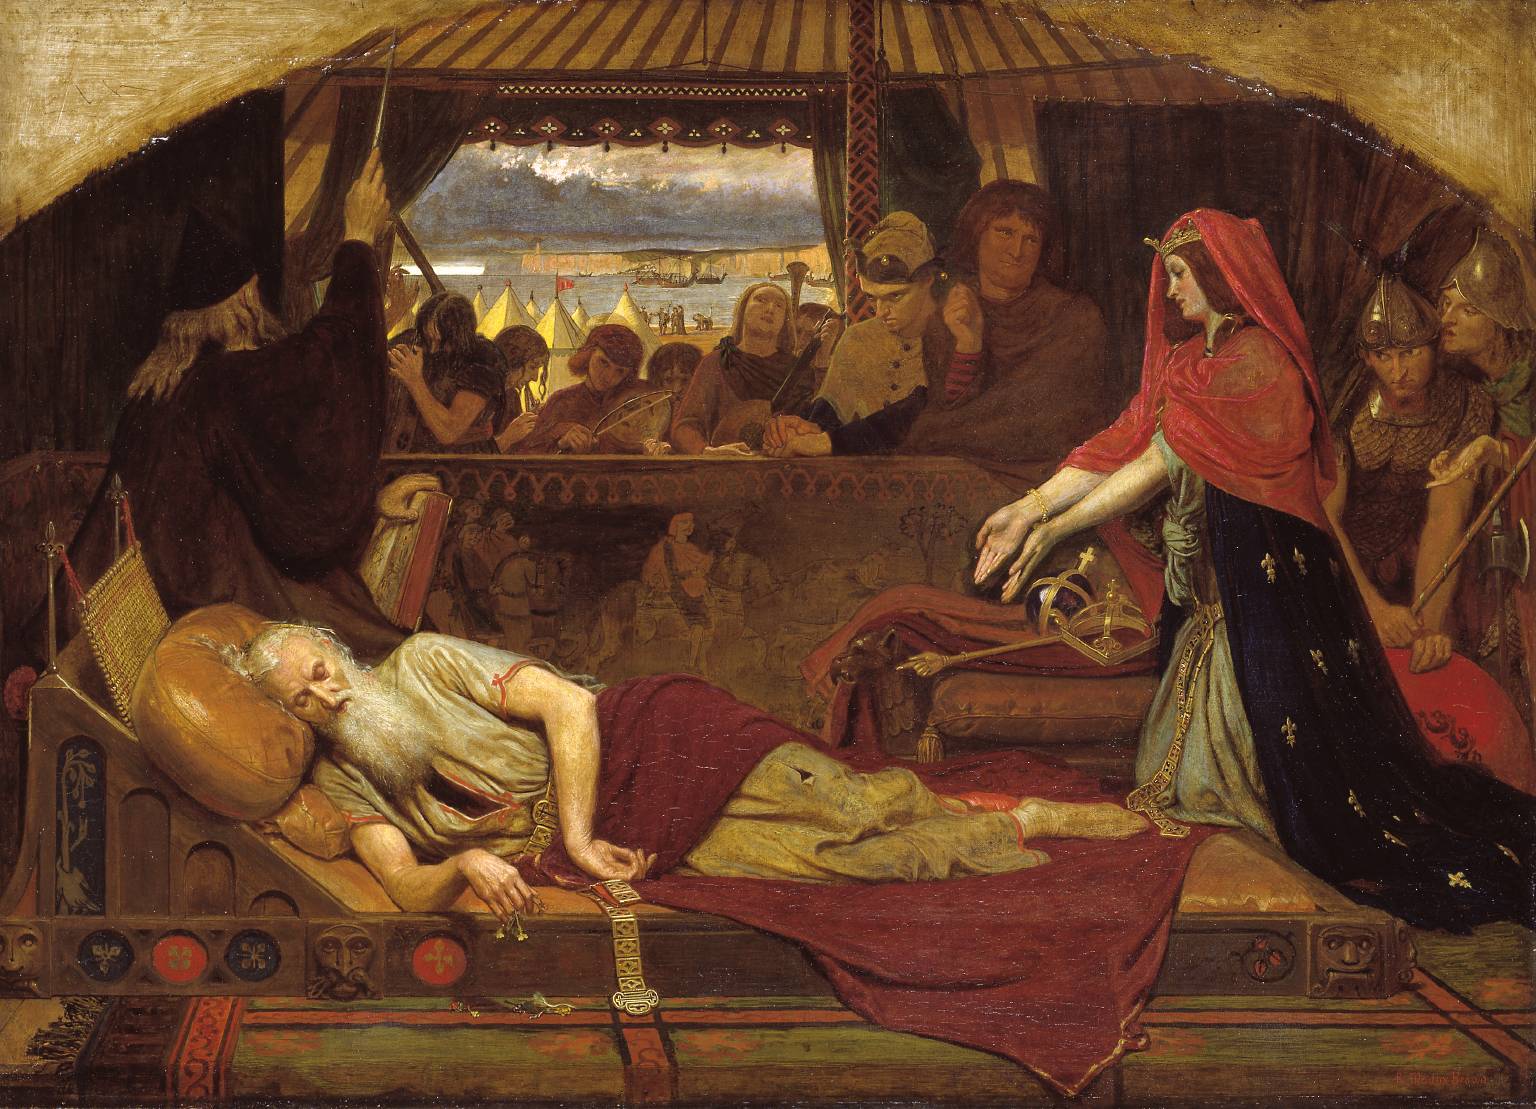 Lear and Cordelia, Ford Madox Brown, c. 1850